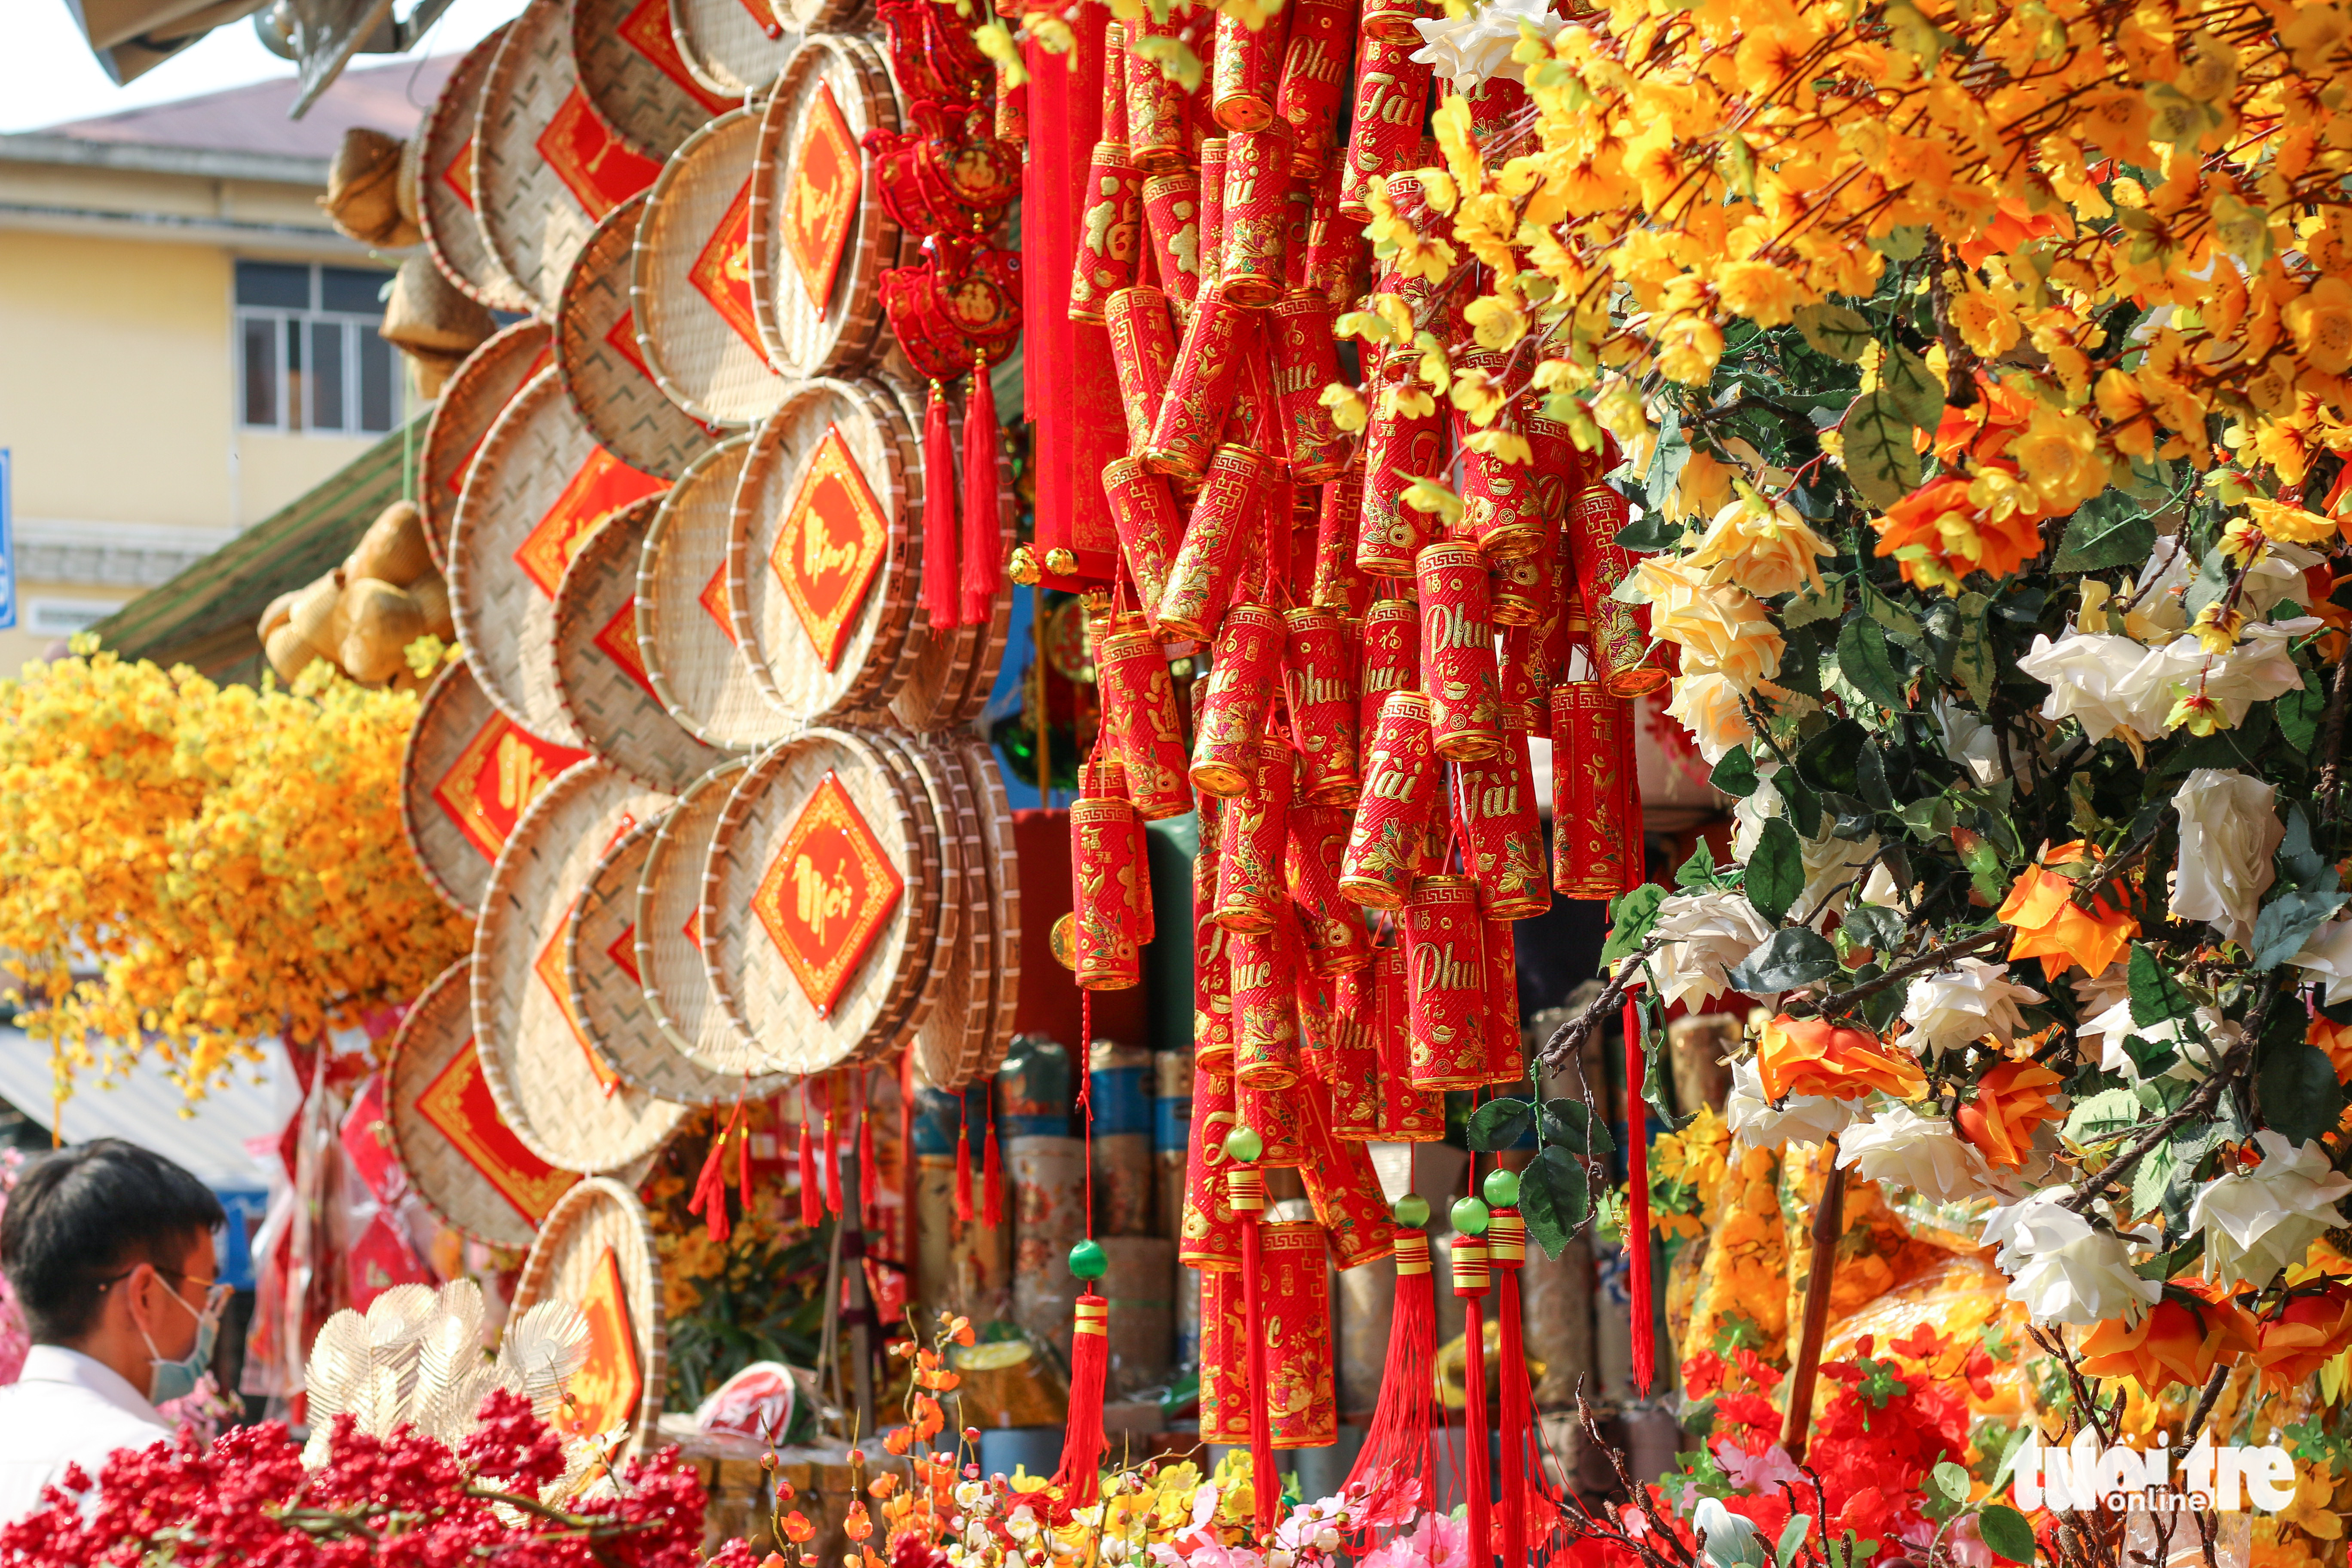 A shop sells red couplets, paper cannons, and artificial apricots and peach blossoms at 'Tai loc' Market on Hai Thuong Lan Ong Street in District 5, Ho Chi Minh City. Photo: Chau Tuan / Tuoi Tre